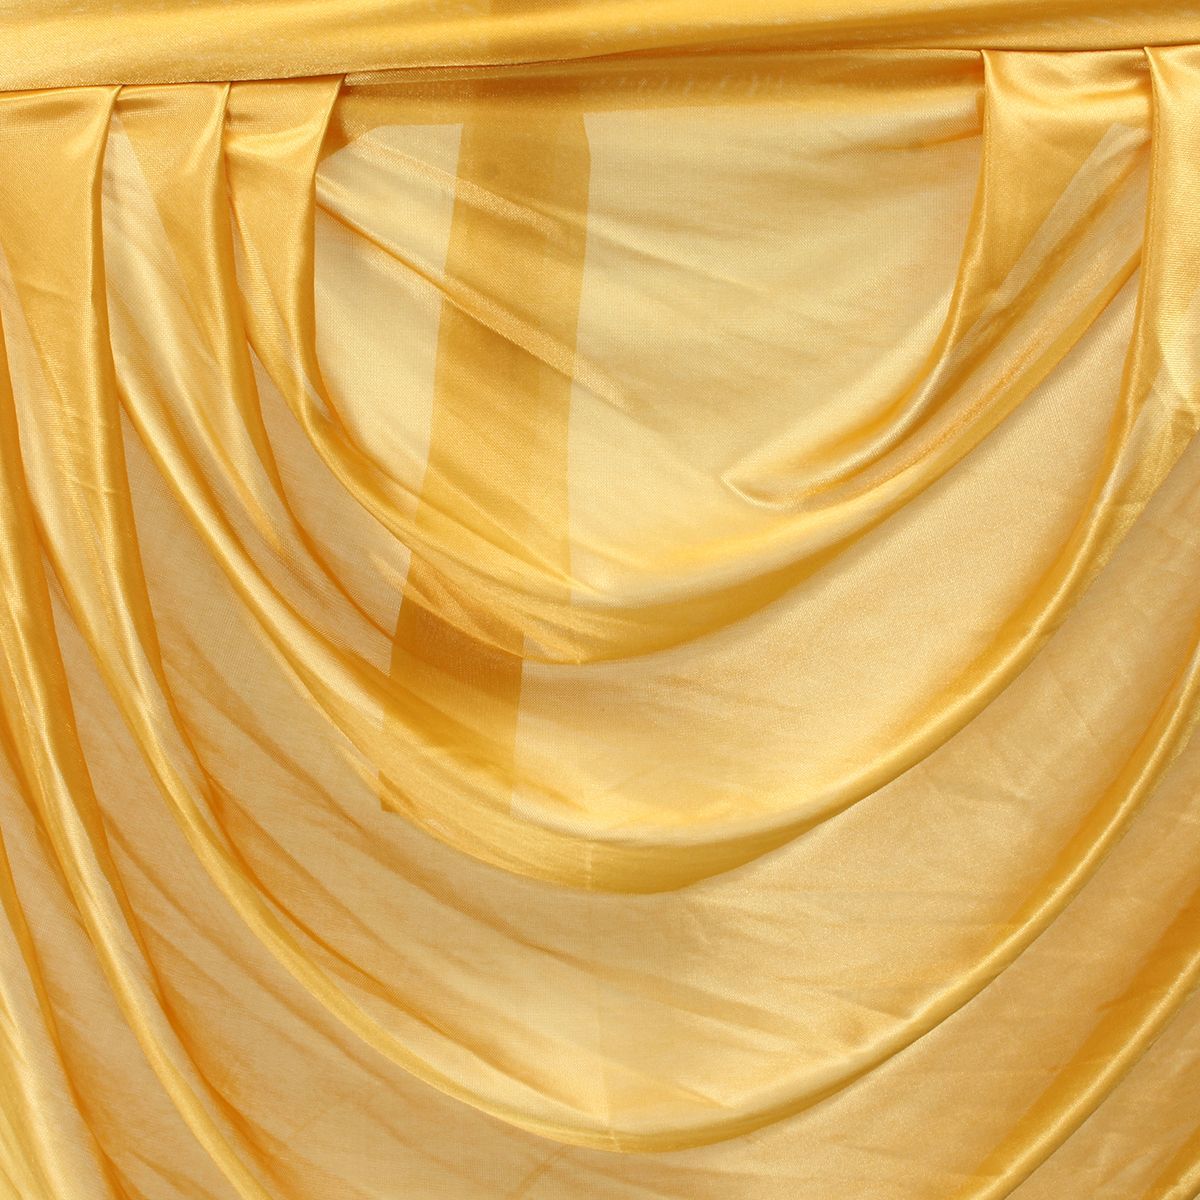 Customized-Gold-Ice-Silk-Satin-Wedding-Backdrop-Swags-Curtain-Party-Stage-Wedding-Decor-Supplies-1577650